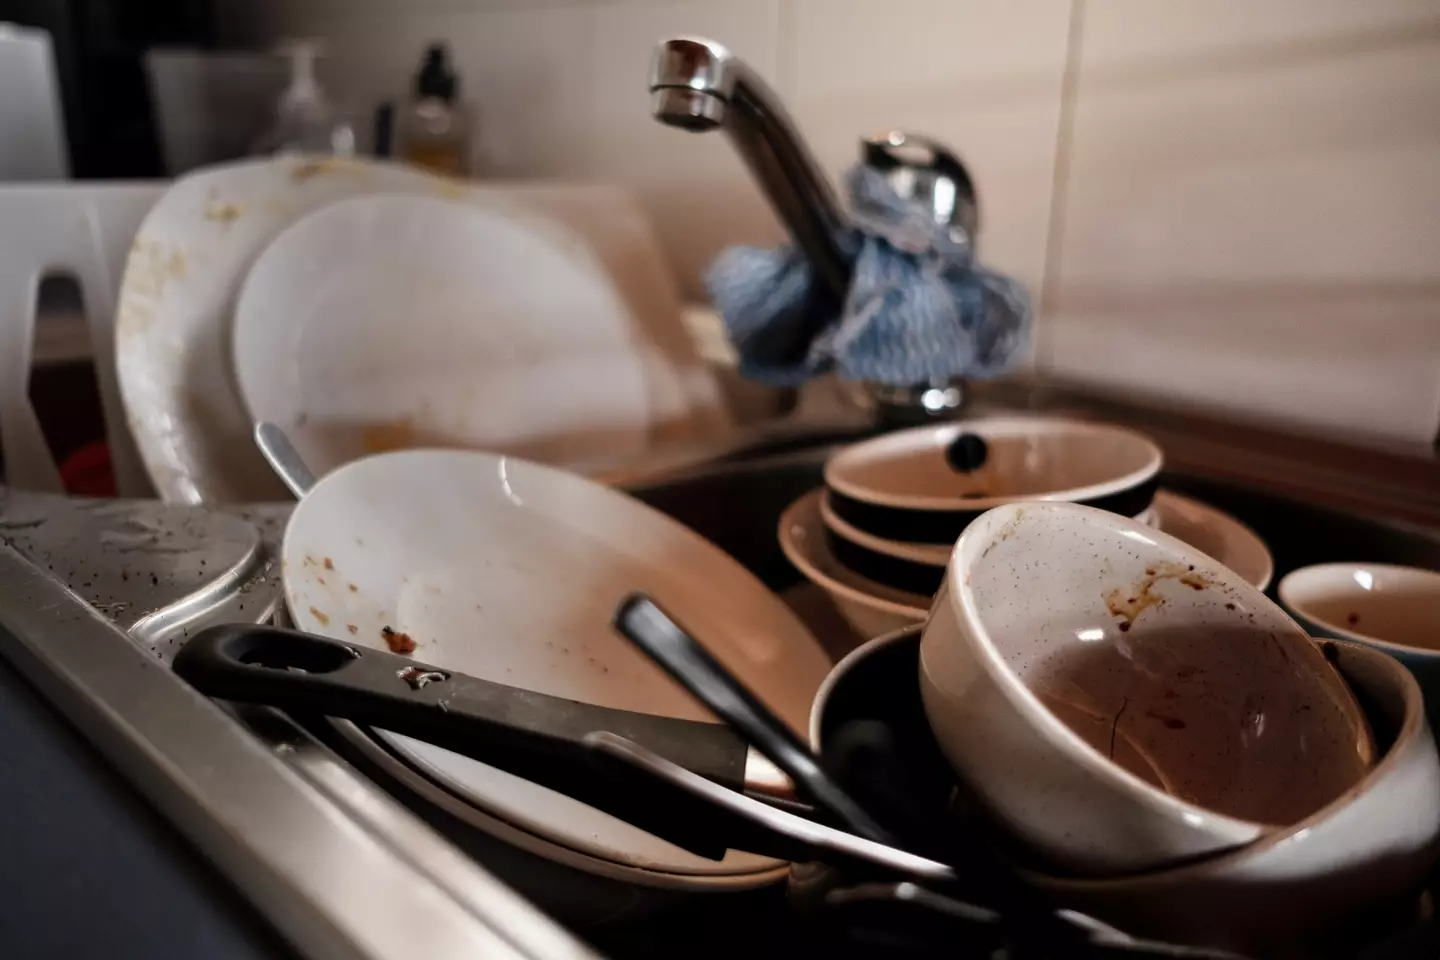 Warning issued to people who 'soak' dirty dishes when washing up